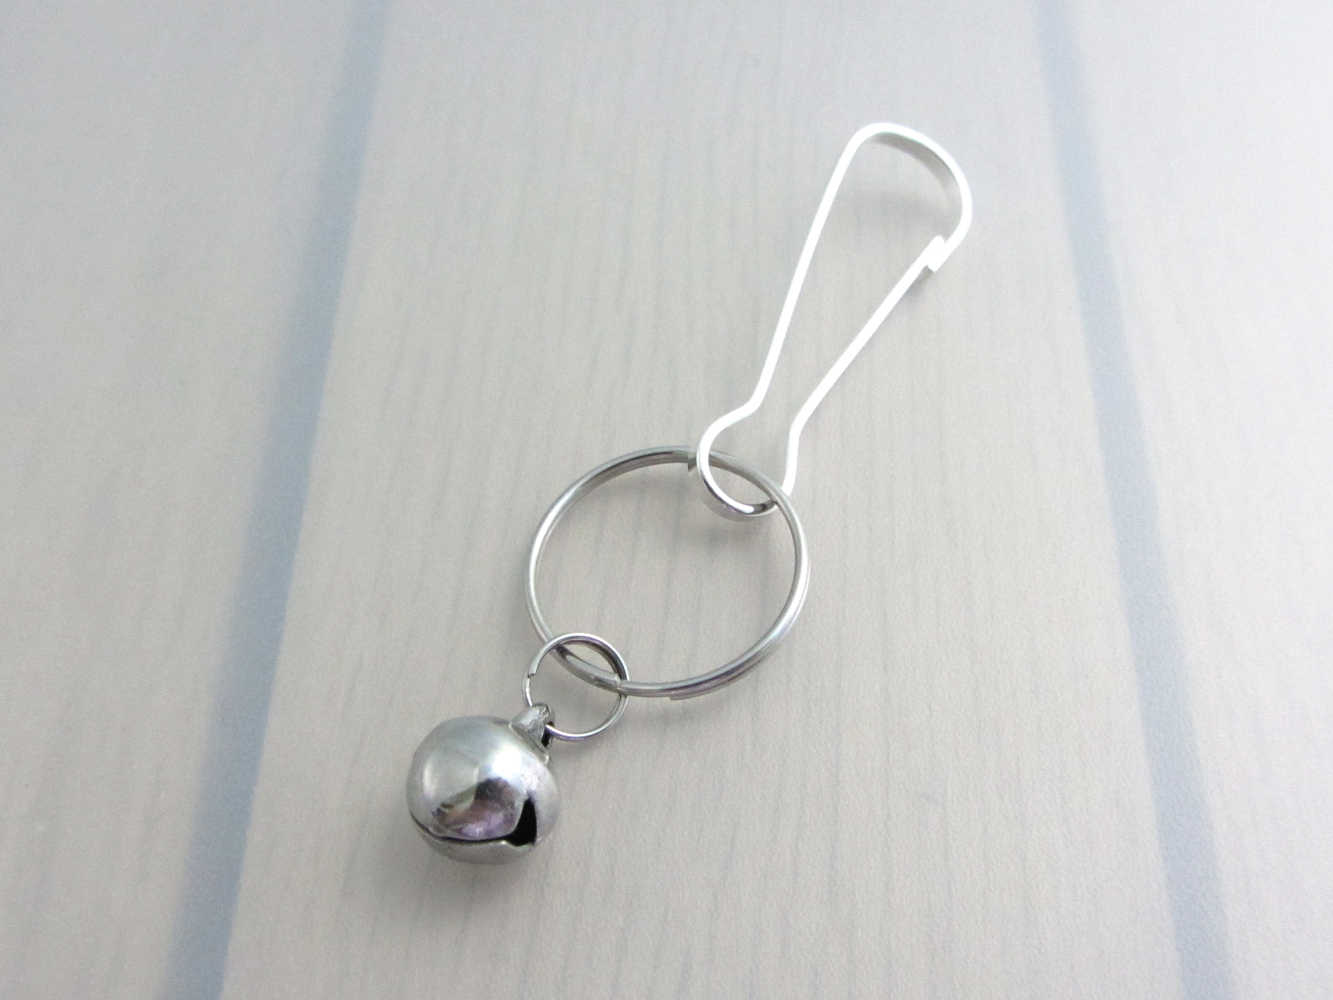 stainless steel bell charm on a bag charm with snap clip hook